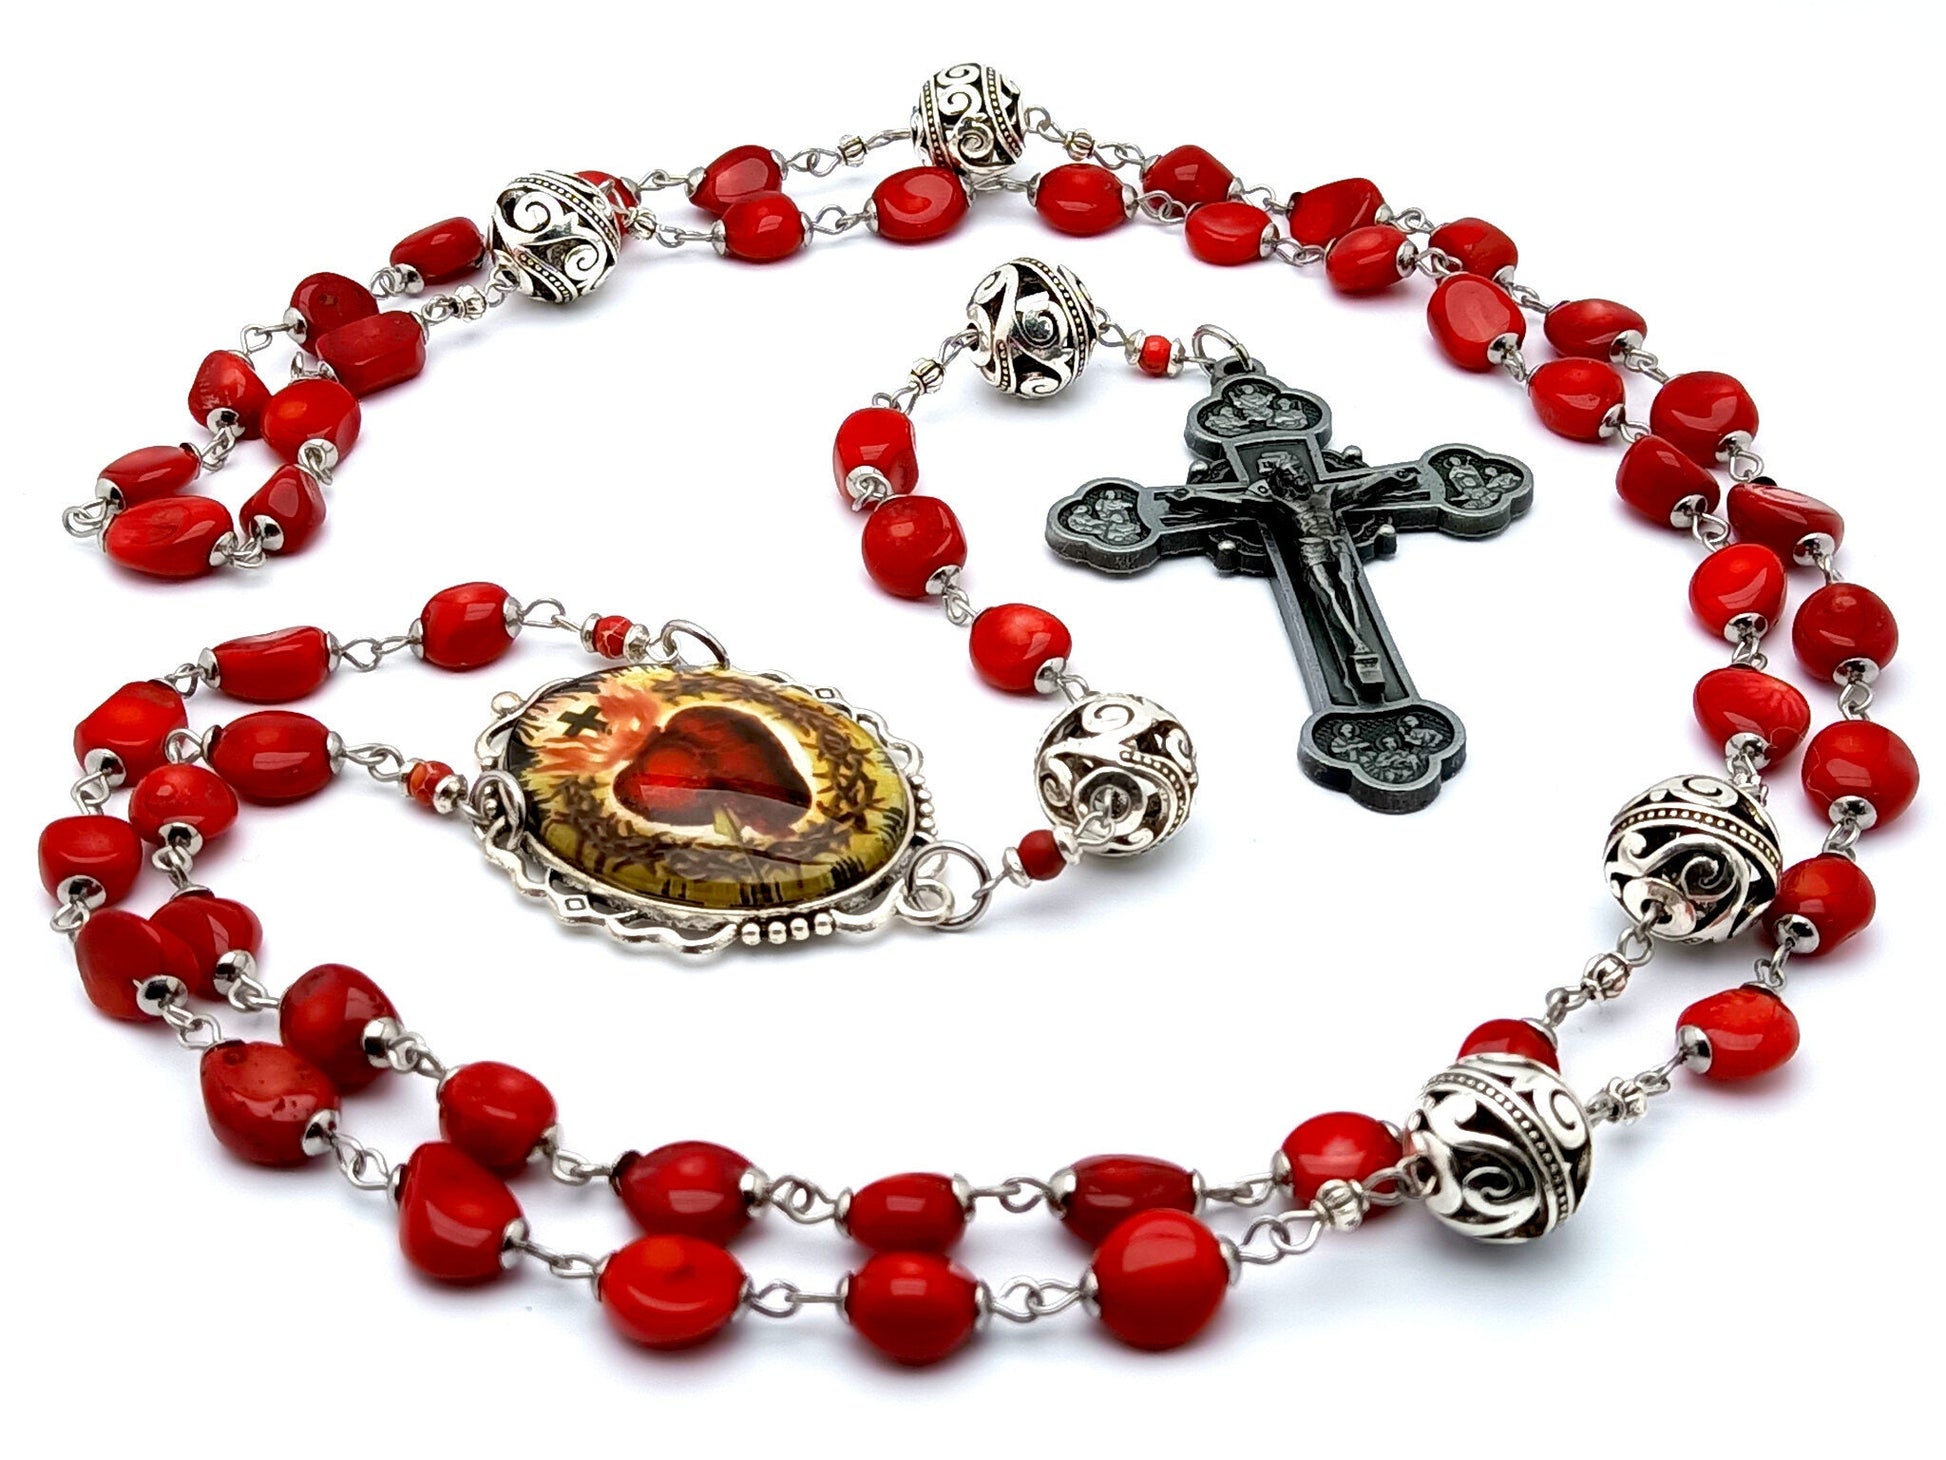 Sacred Heart of Jesus unique rosary beads with red gemstone beads, pewter crucifix and silver picture centre medal.